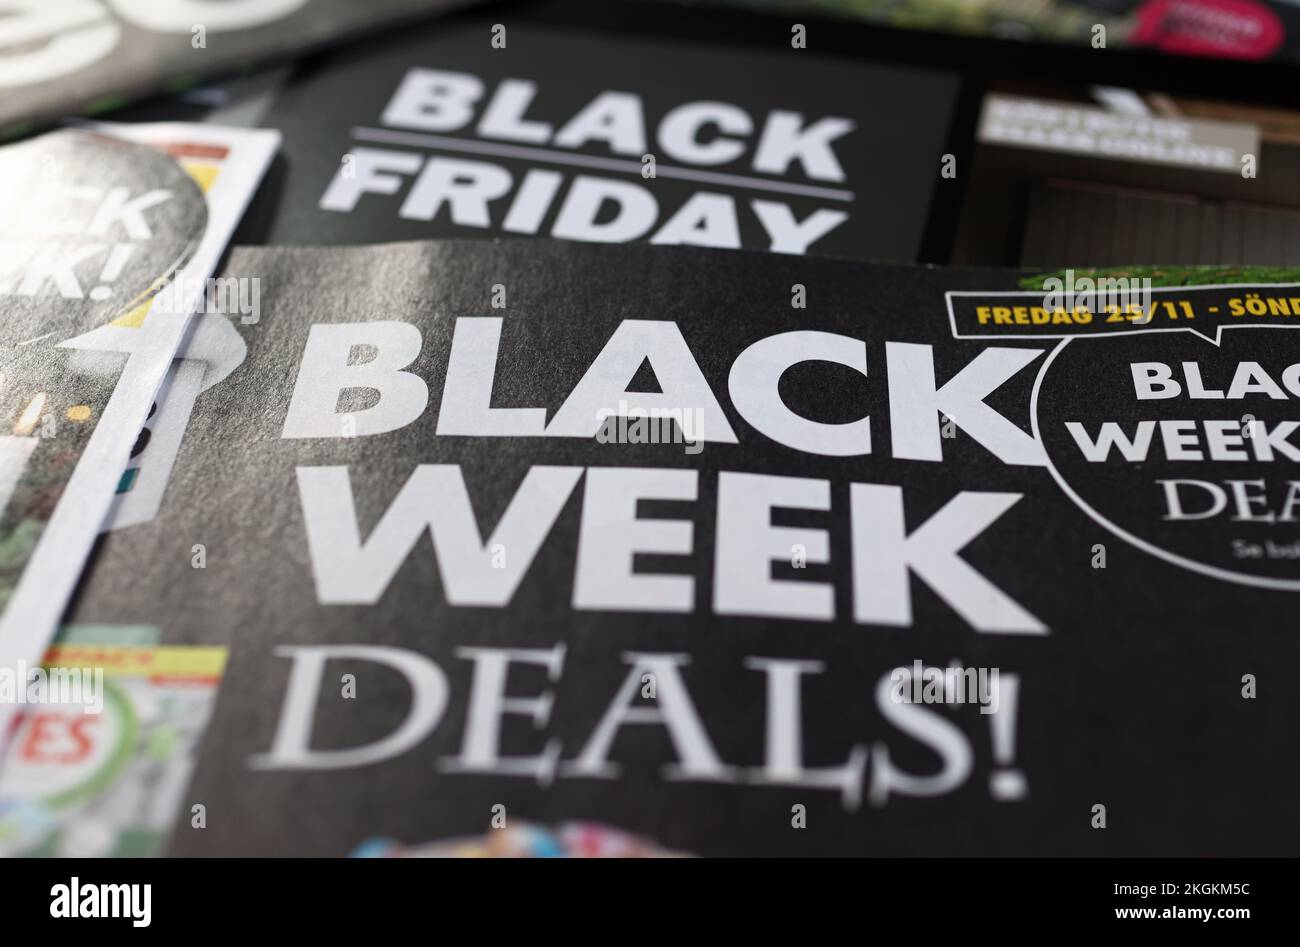 Advertising from various companies about offers during Black Friday and  Black week. Black Friday is a colloquial term for the Friday after  Thanksgiving in the United States. It traditionally marks the start